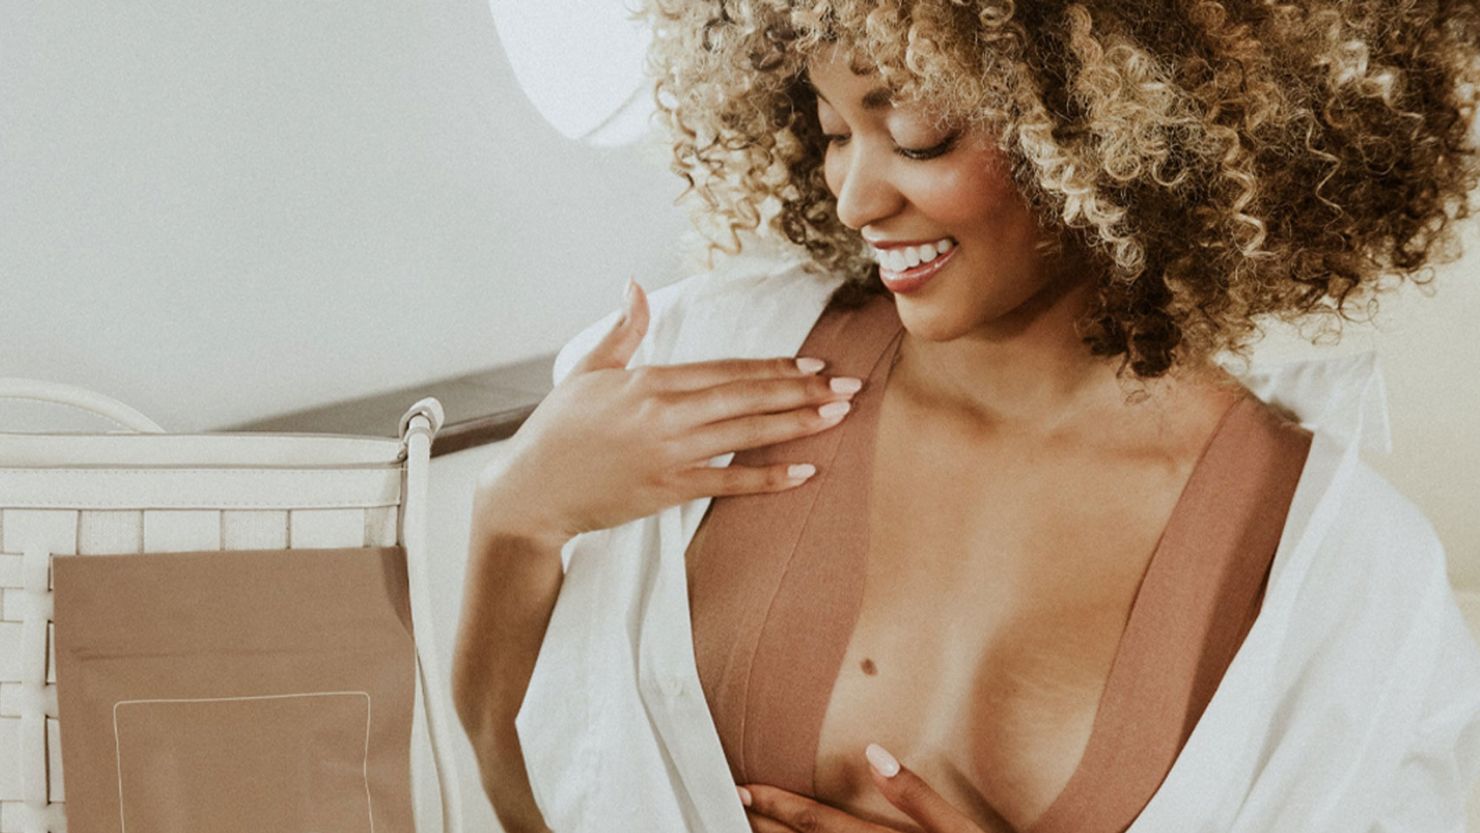 How to Tape Your Boobs for a Strapless Dress: 4 Easy Ways